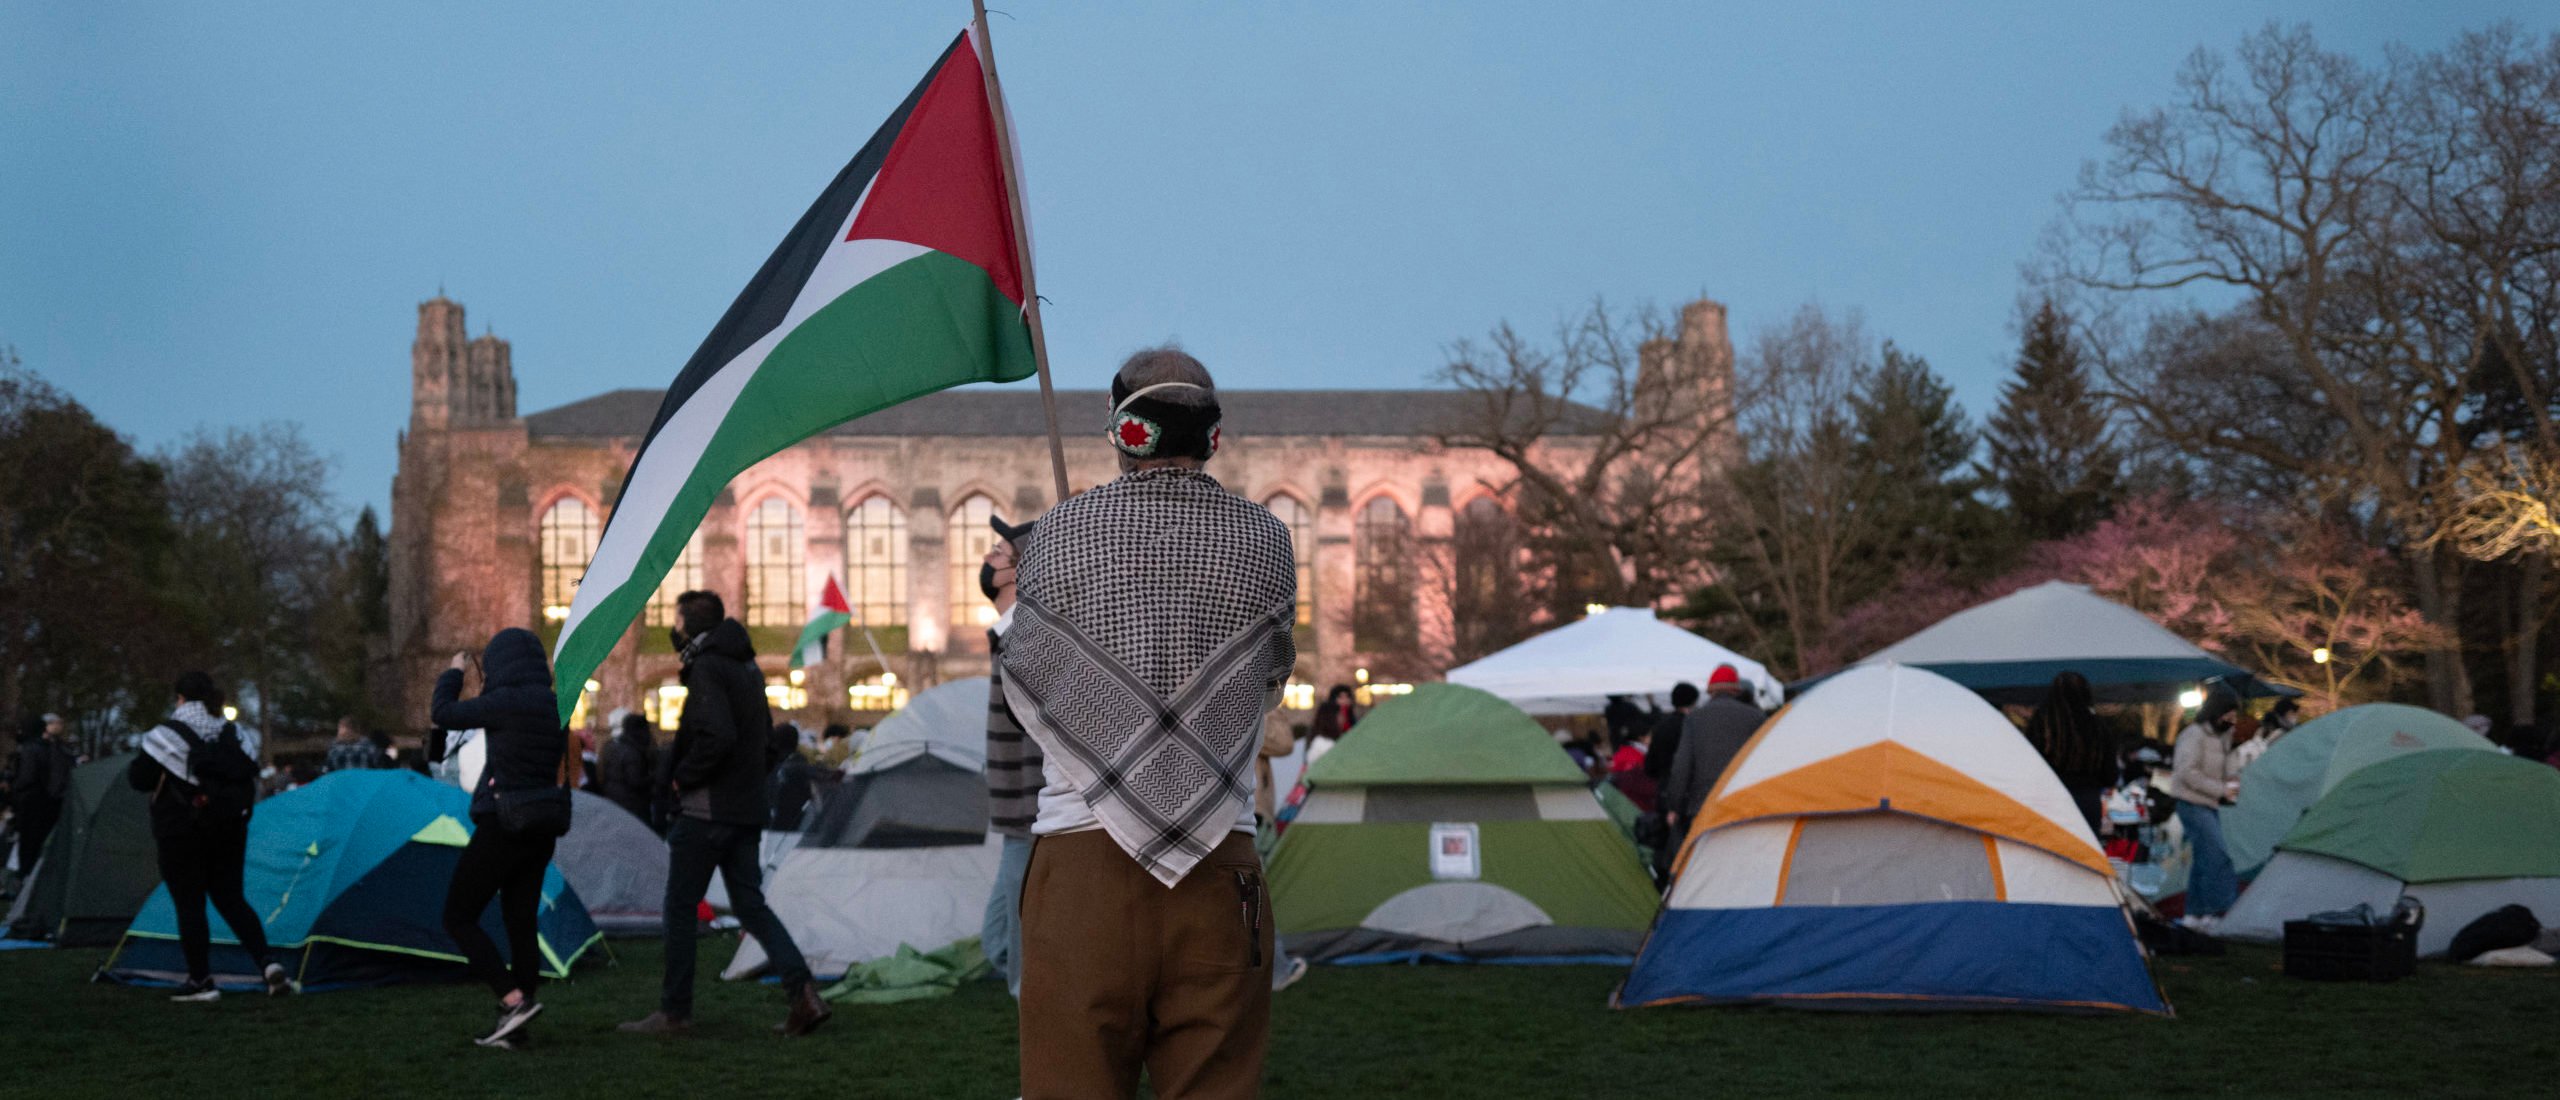 EVANSTON, ILLINOIS - APRIL 25: People rally on the campus of Northwestern University to show support for residents of Gaza on April 25, 2024 in Evanston, Illinois. The rally is among many roiling university campuses across the country in response to the ongoing war in Gaza. (Photo by Scott Olson/Getty Images)